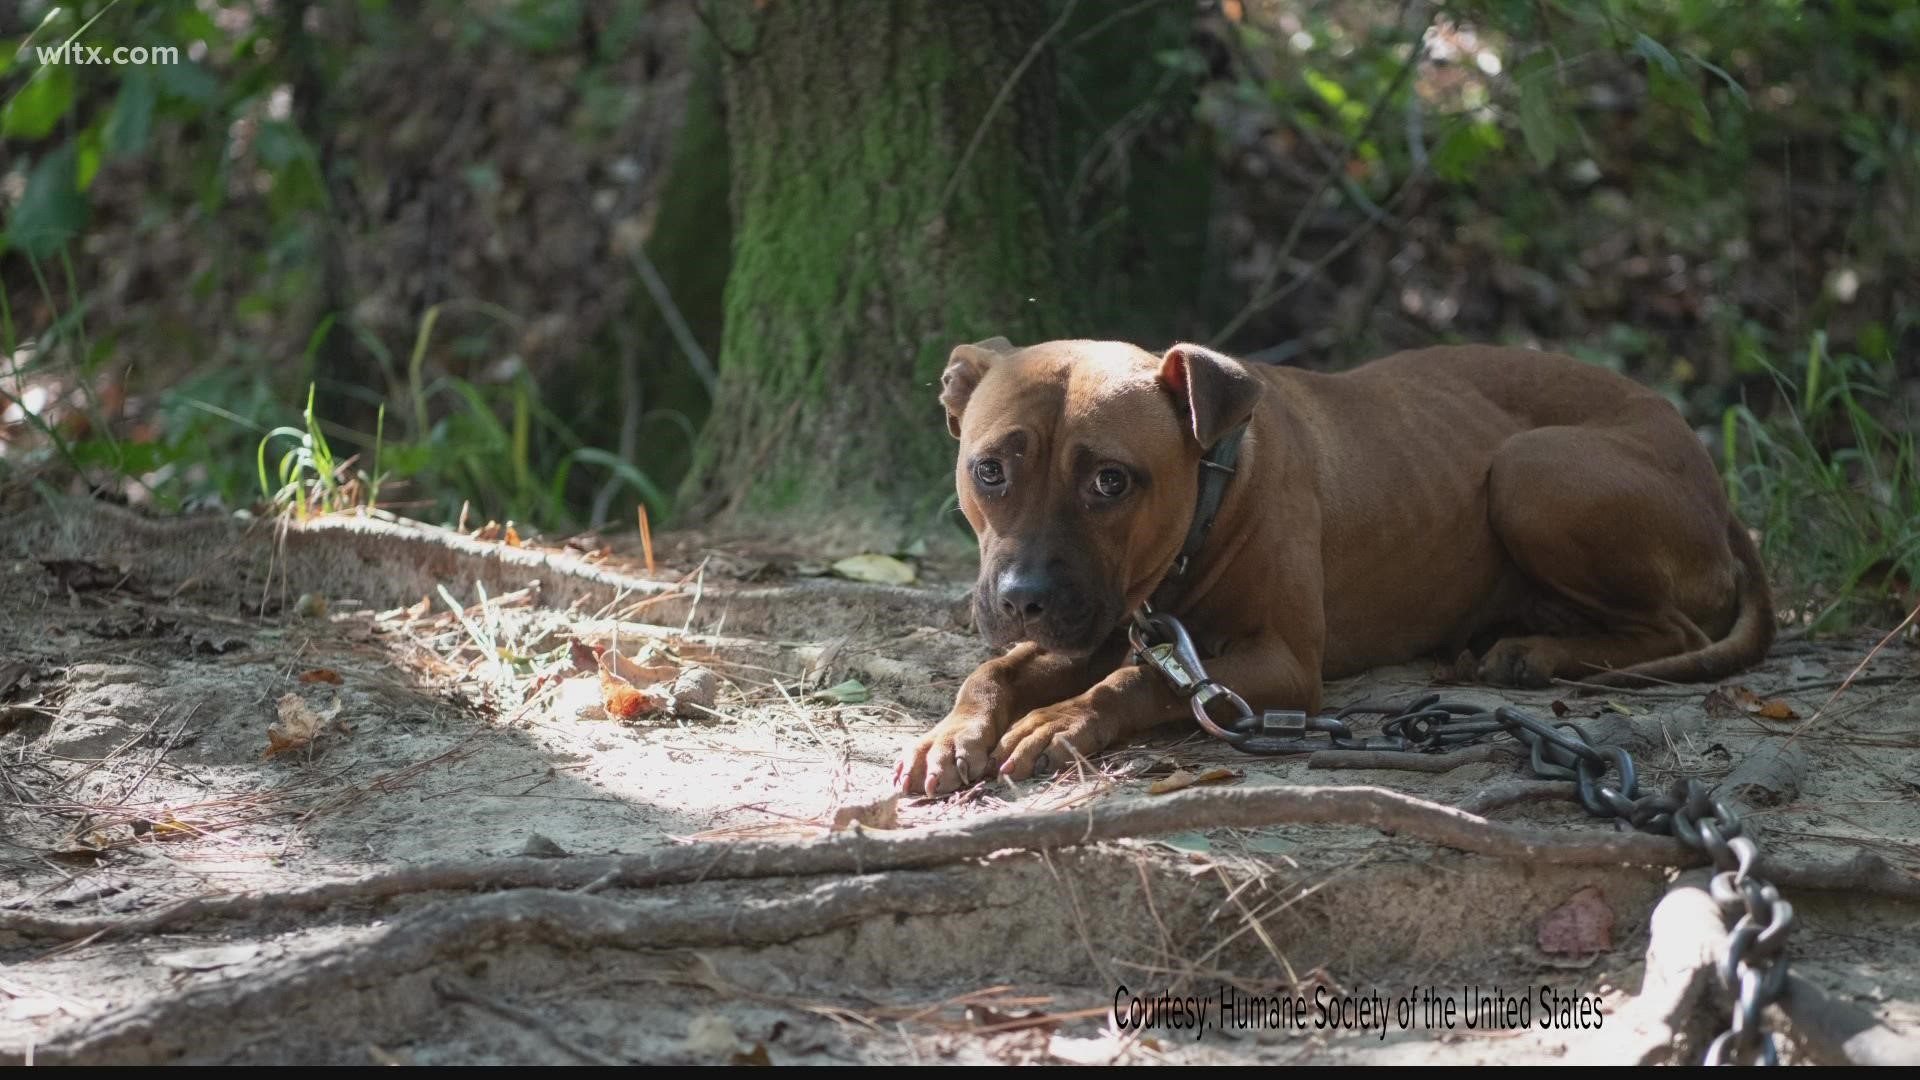 21 people have been arrested in the biggest dog fighting bust in South Carolina's history. So, what's next for the more than 300 dogs recovered?